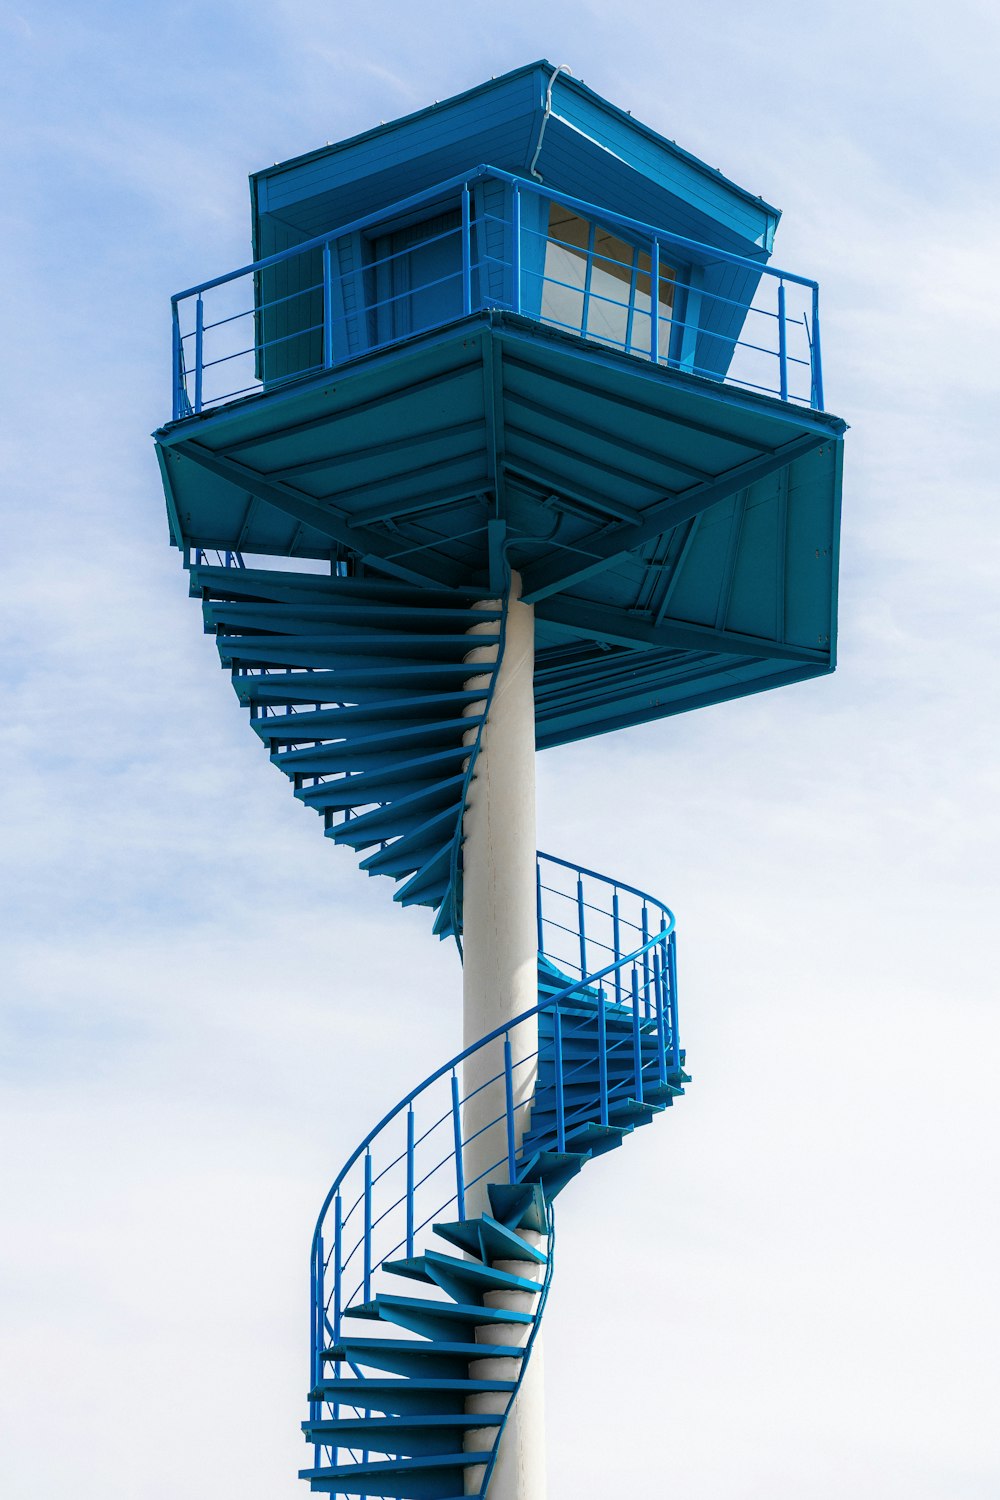 a tall blue tower with a spiral staircase